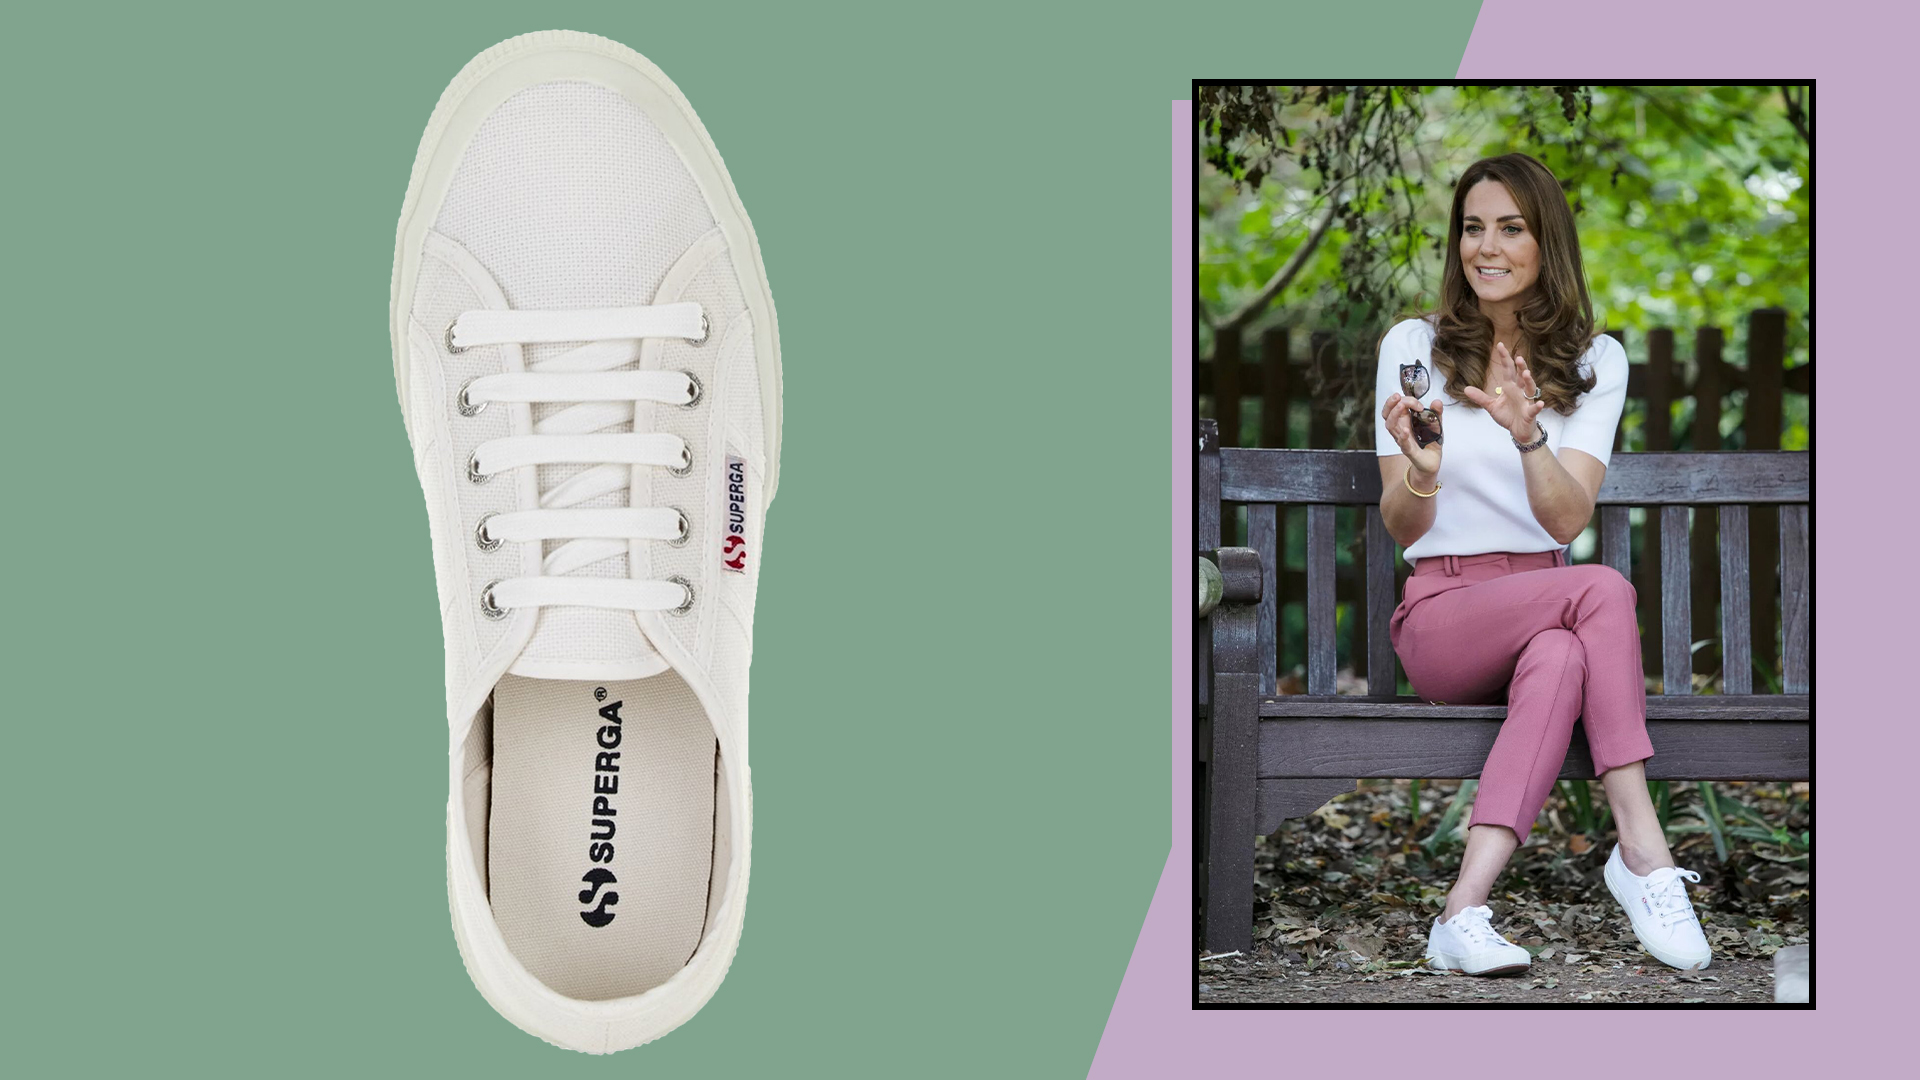 Kate Middleton's Superga Sneakers Are A Bargain For Amazon, 52% OFF